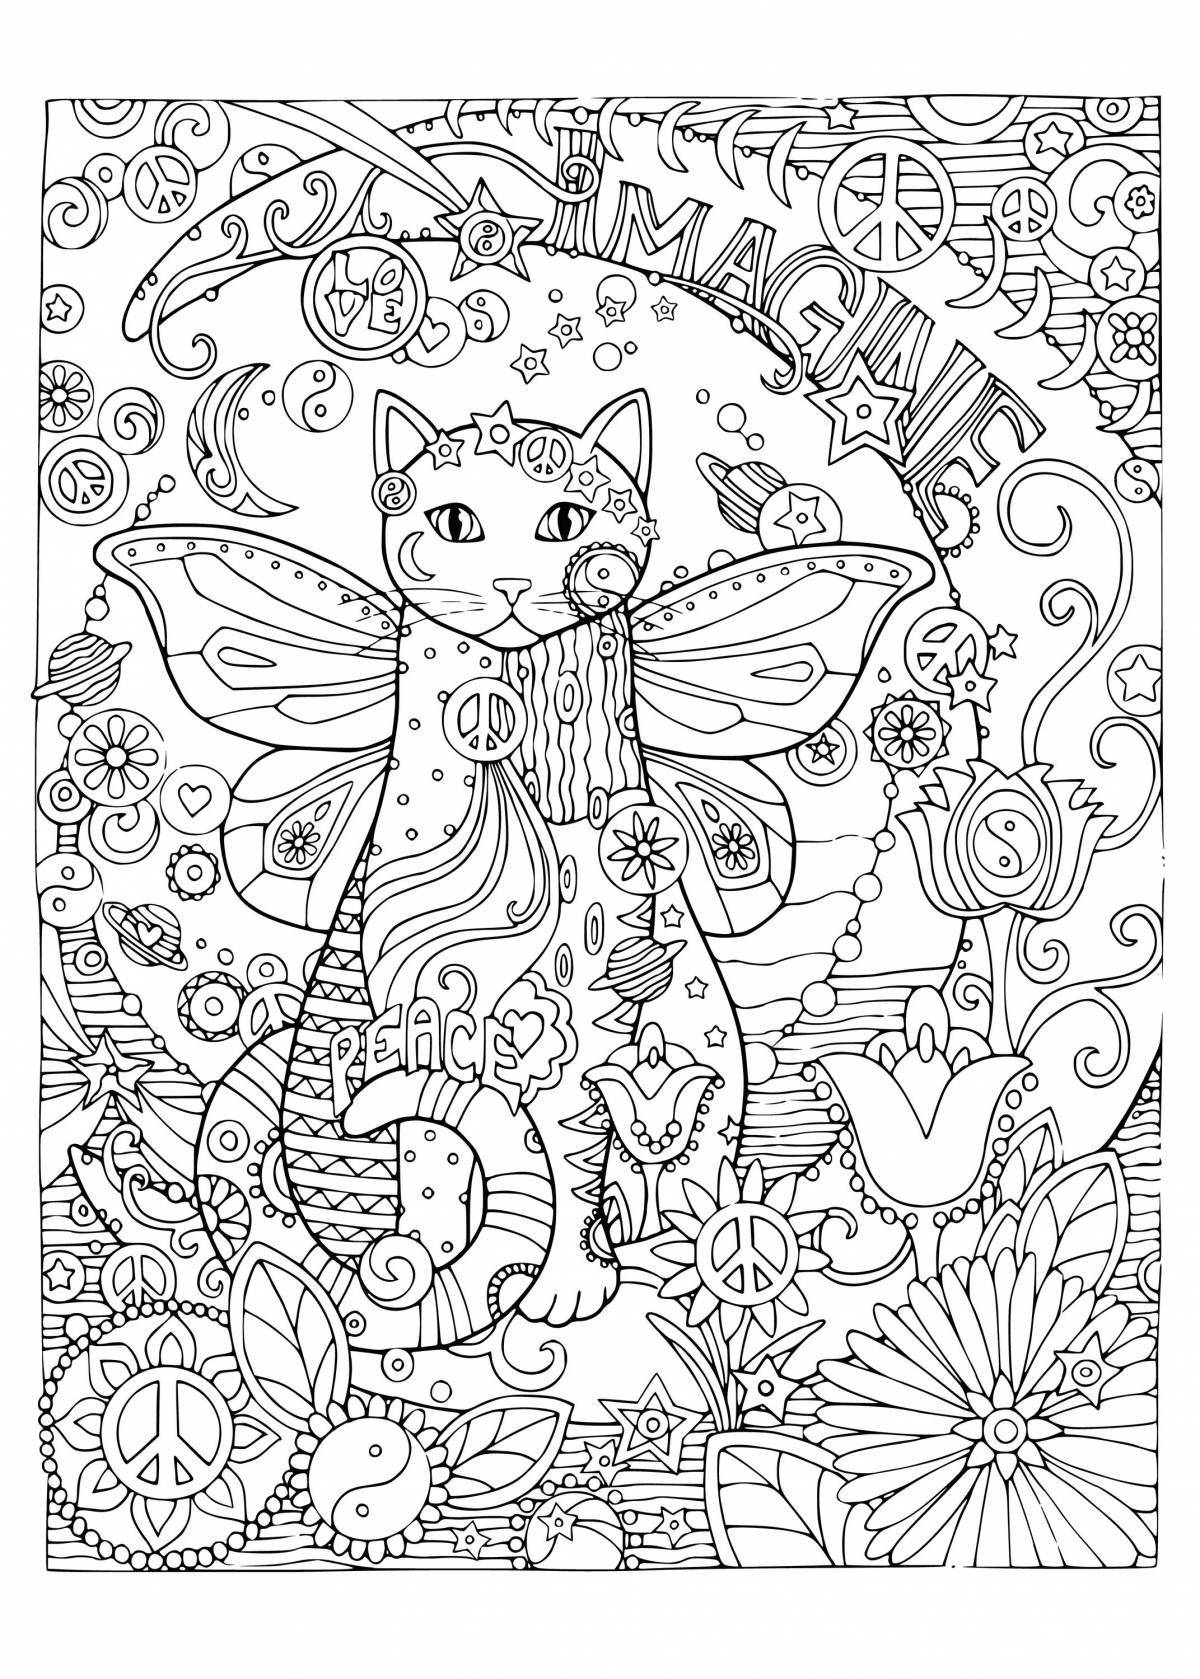 Colourful anti-stress cat coloring book for girls